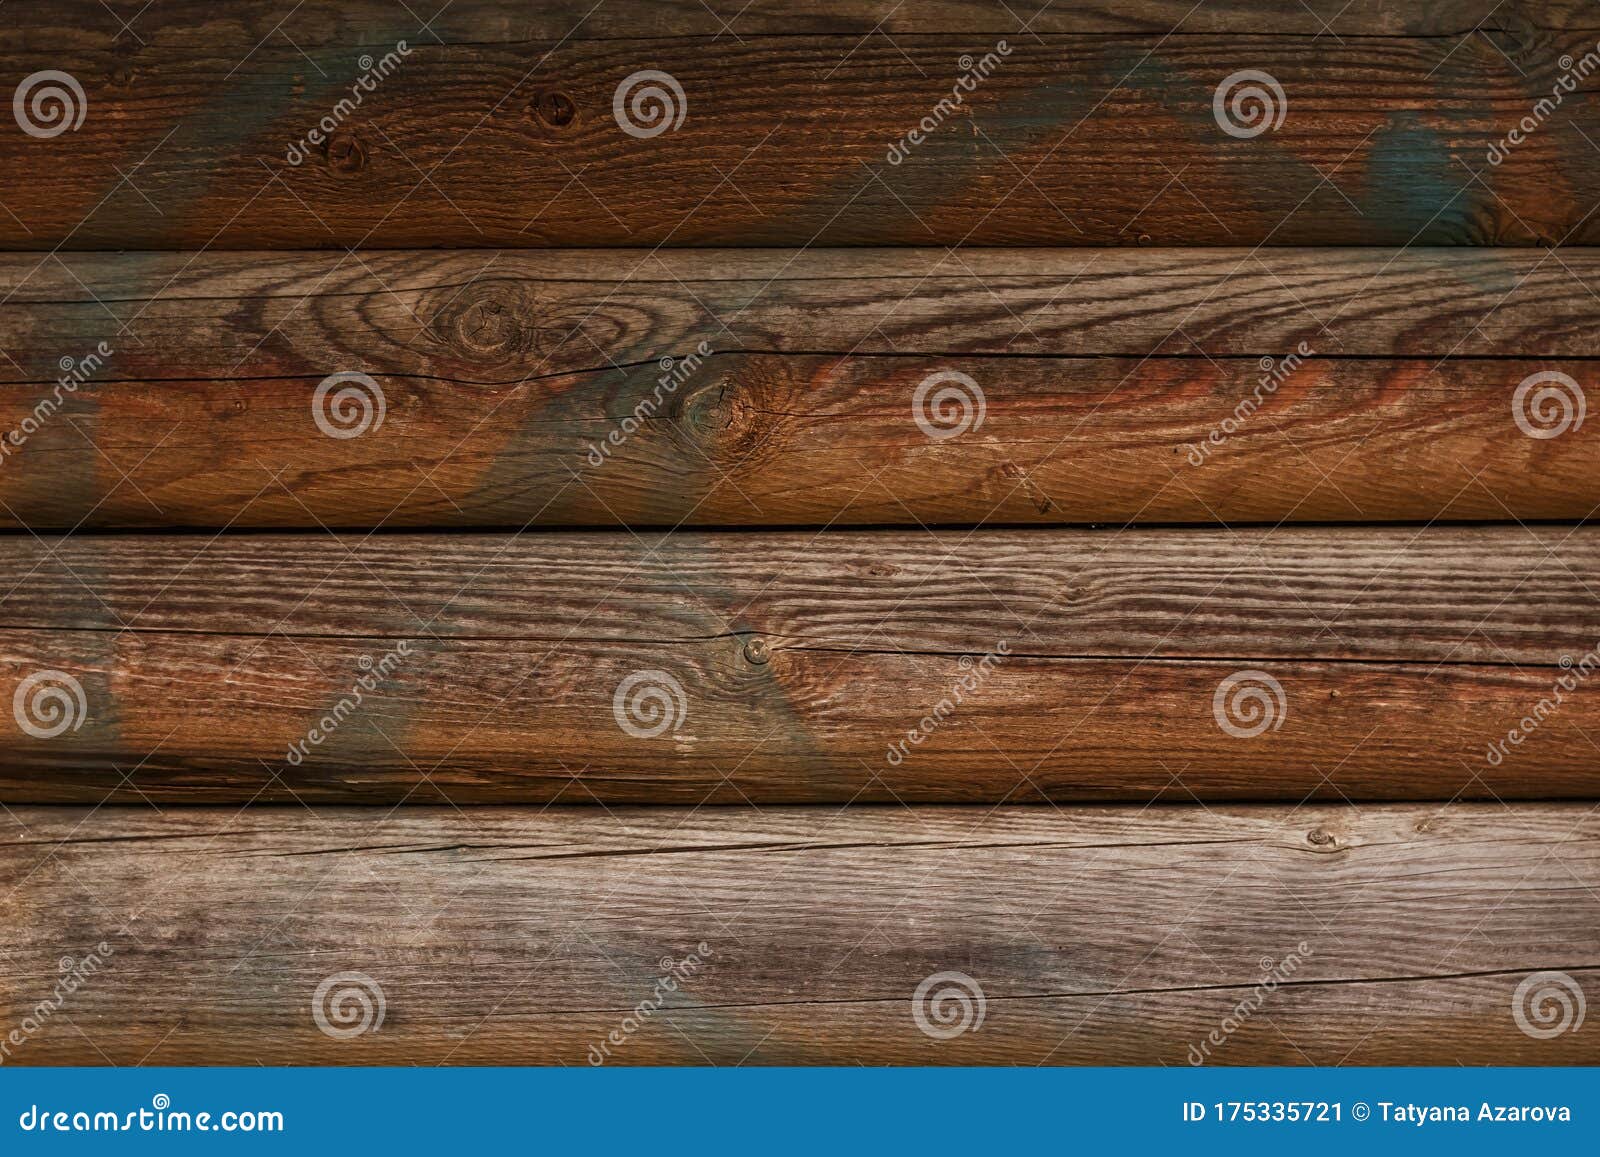 Weathered Wood Texture With Paint Spots Vintage Wooden Desk Surface Natural Material Brown Timber Planks Background Rustic Old Stock Image Image Of Desk Graphic 175335721